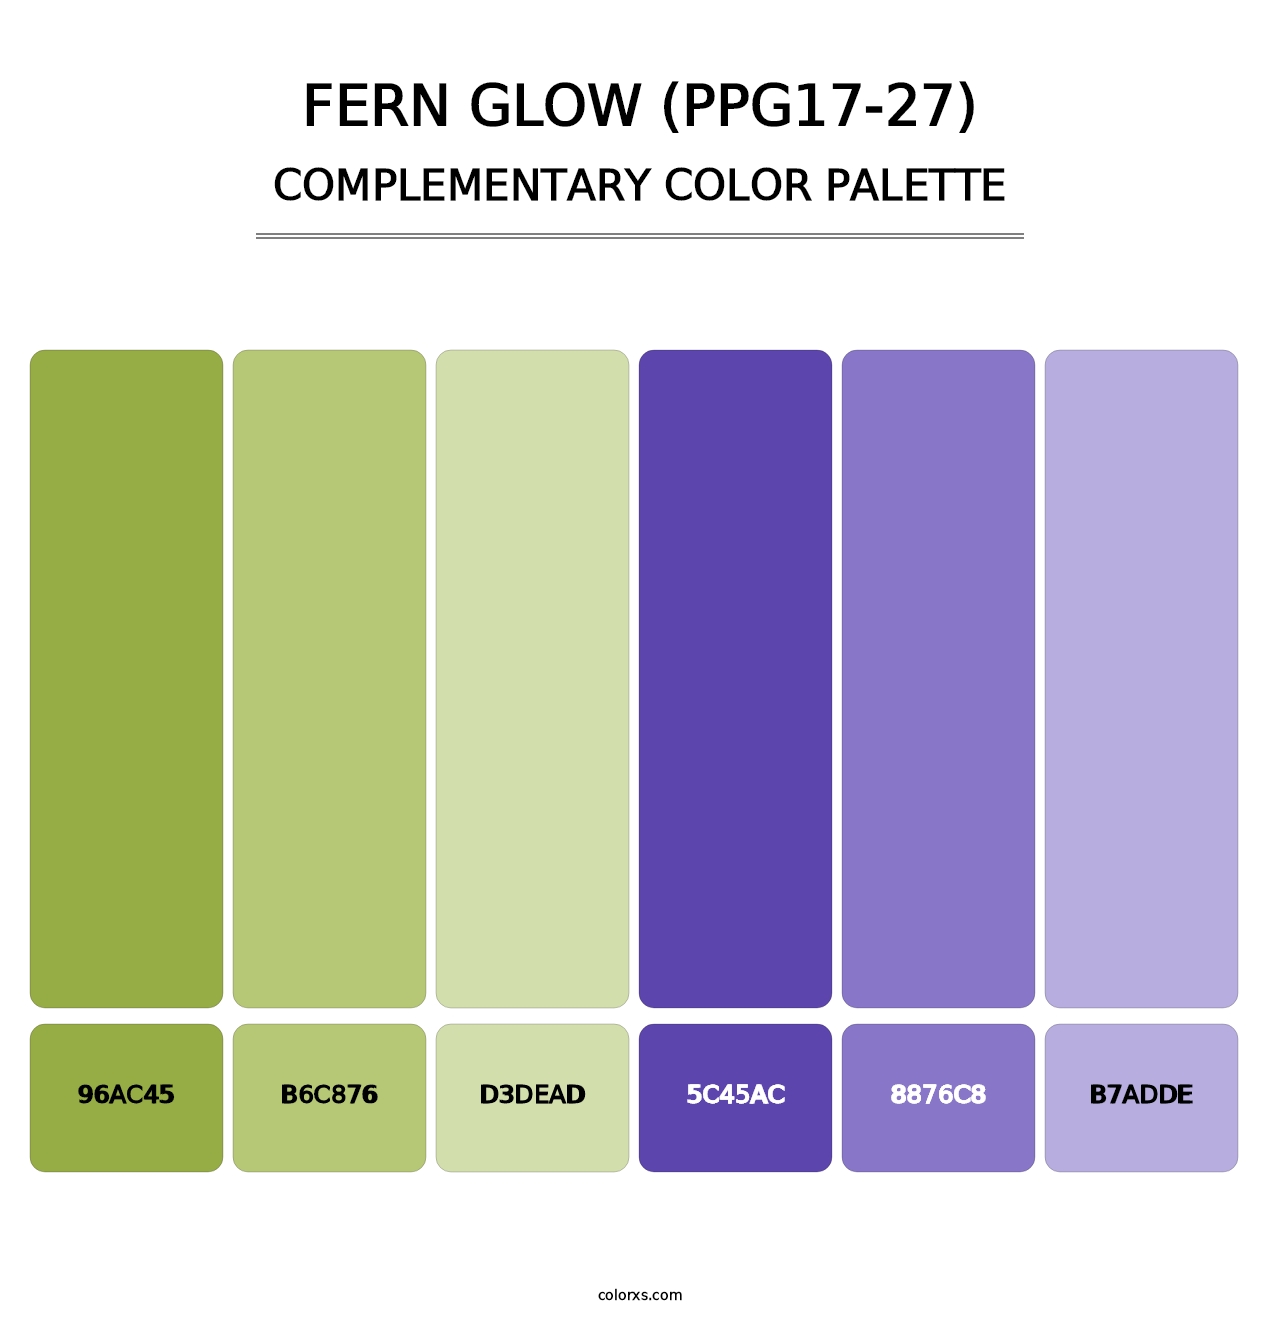 Fern Glow (PPG17-27) - Complementary Color Palette